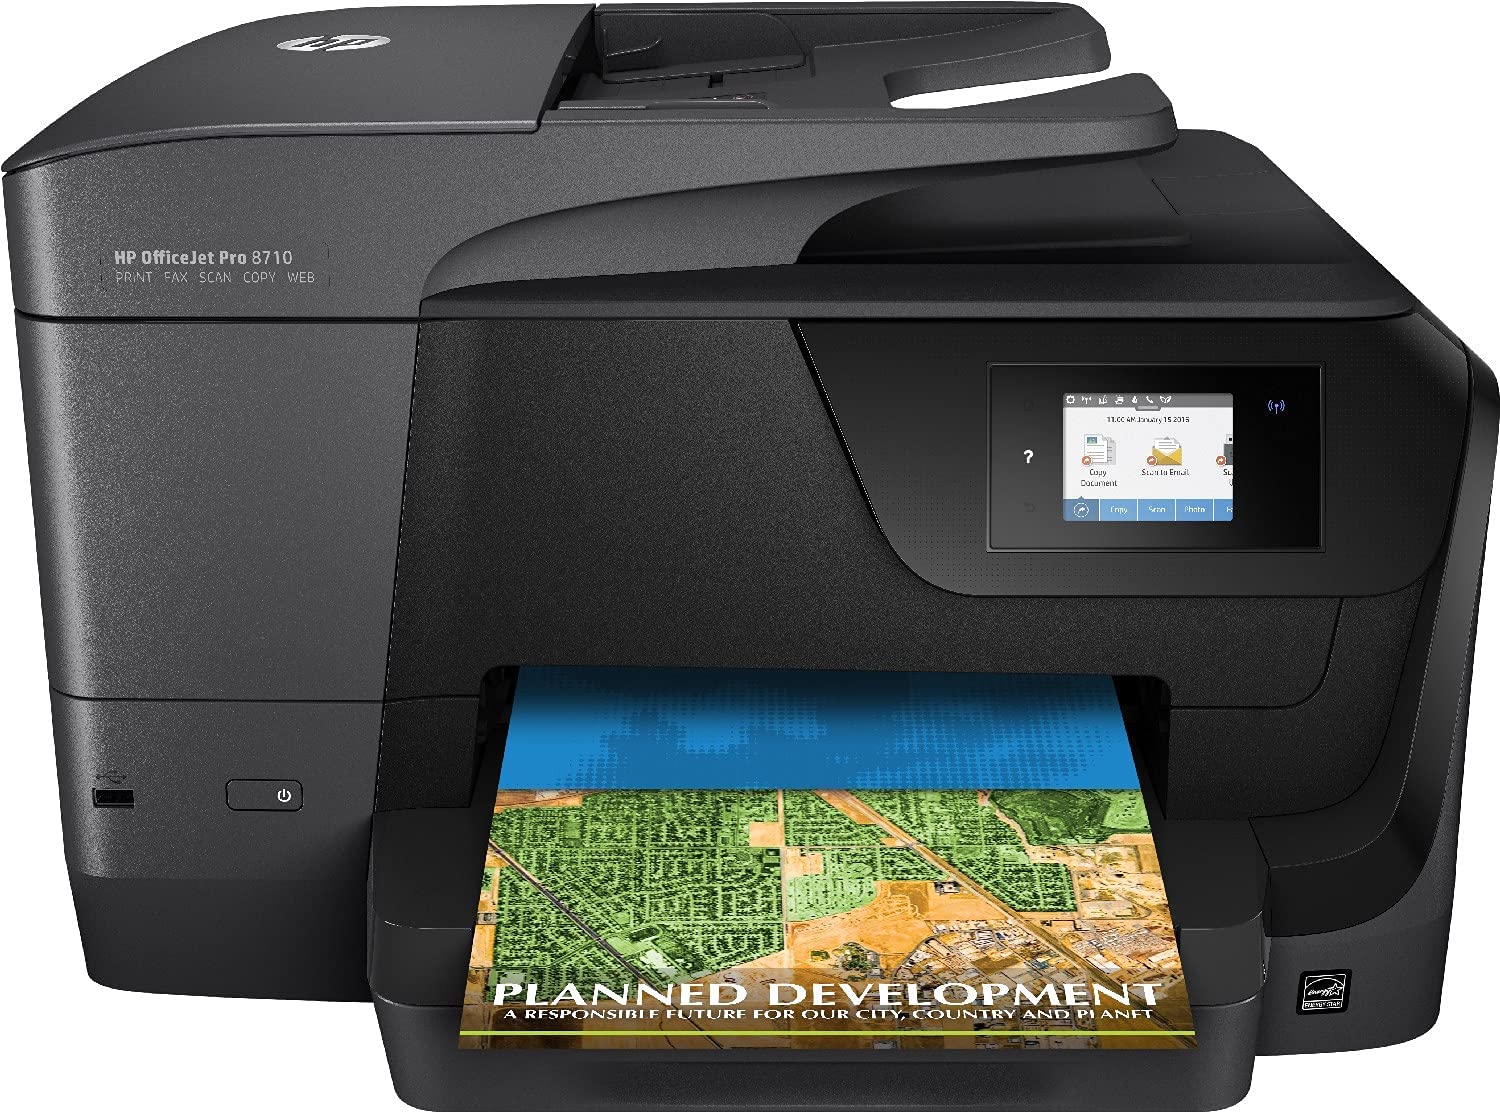 How to Install HP OfficeJet Pro 8710/8715/8720 MX Linux - Featured